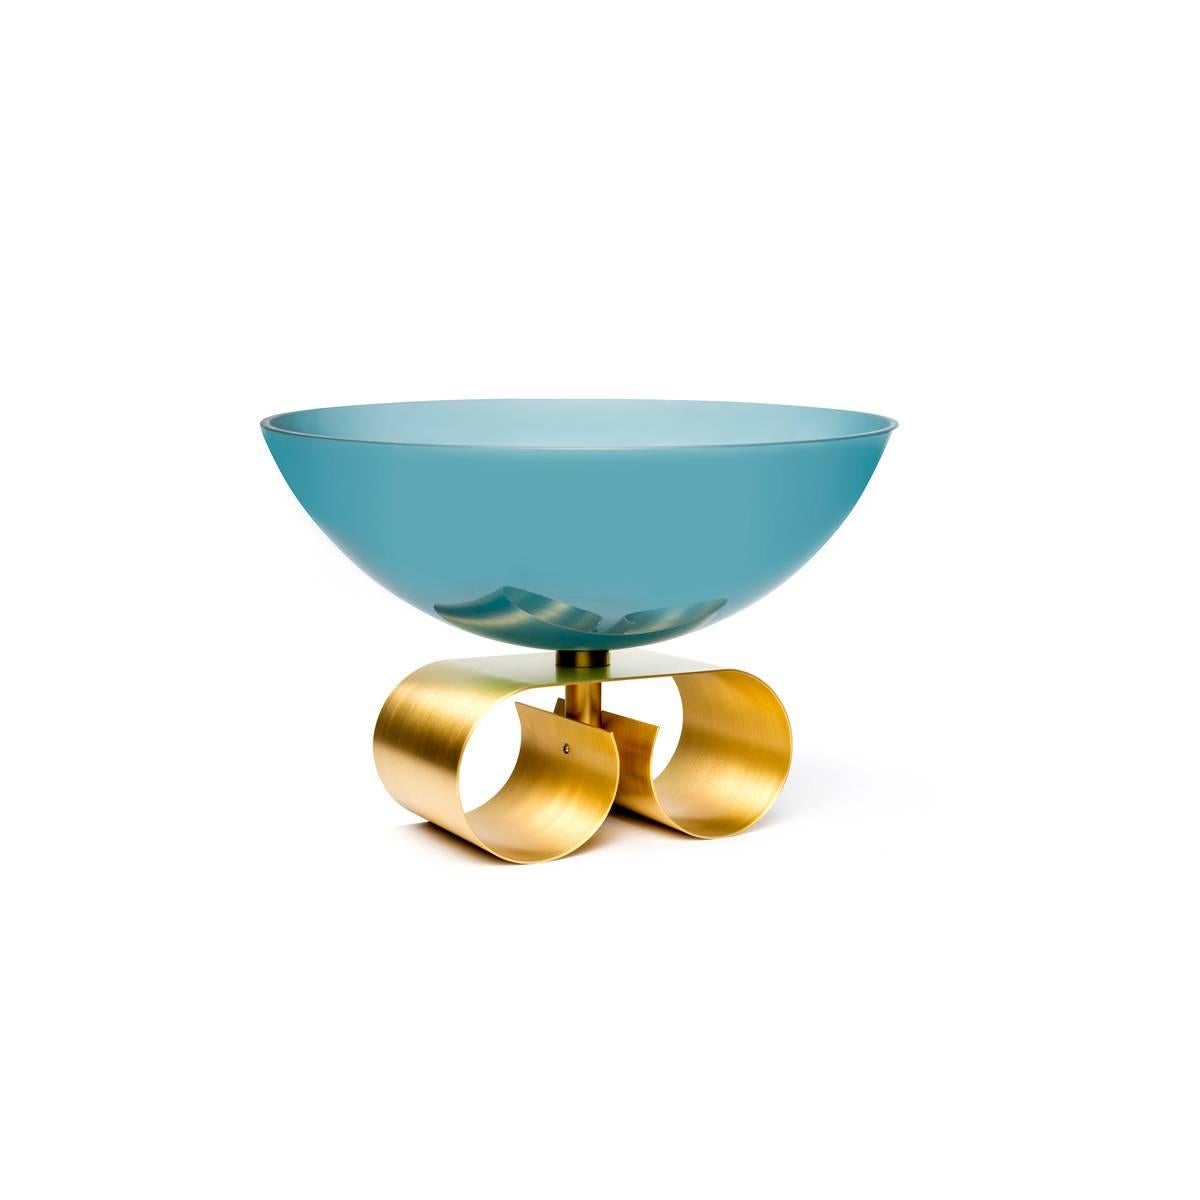 Large glass bowl with brass base, available in two colors versions: blue or light blue.
Parure II, designed by Cristina Celestino, is part of Dolce Vita, a collection that celebrates in a contemporary tone the charme of Italy in the Fifties - an era